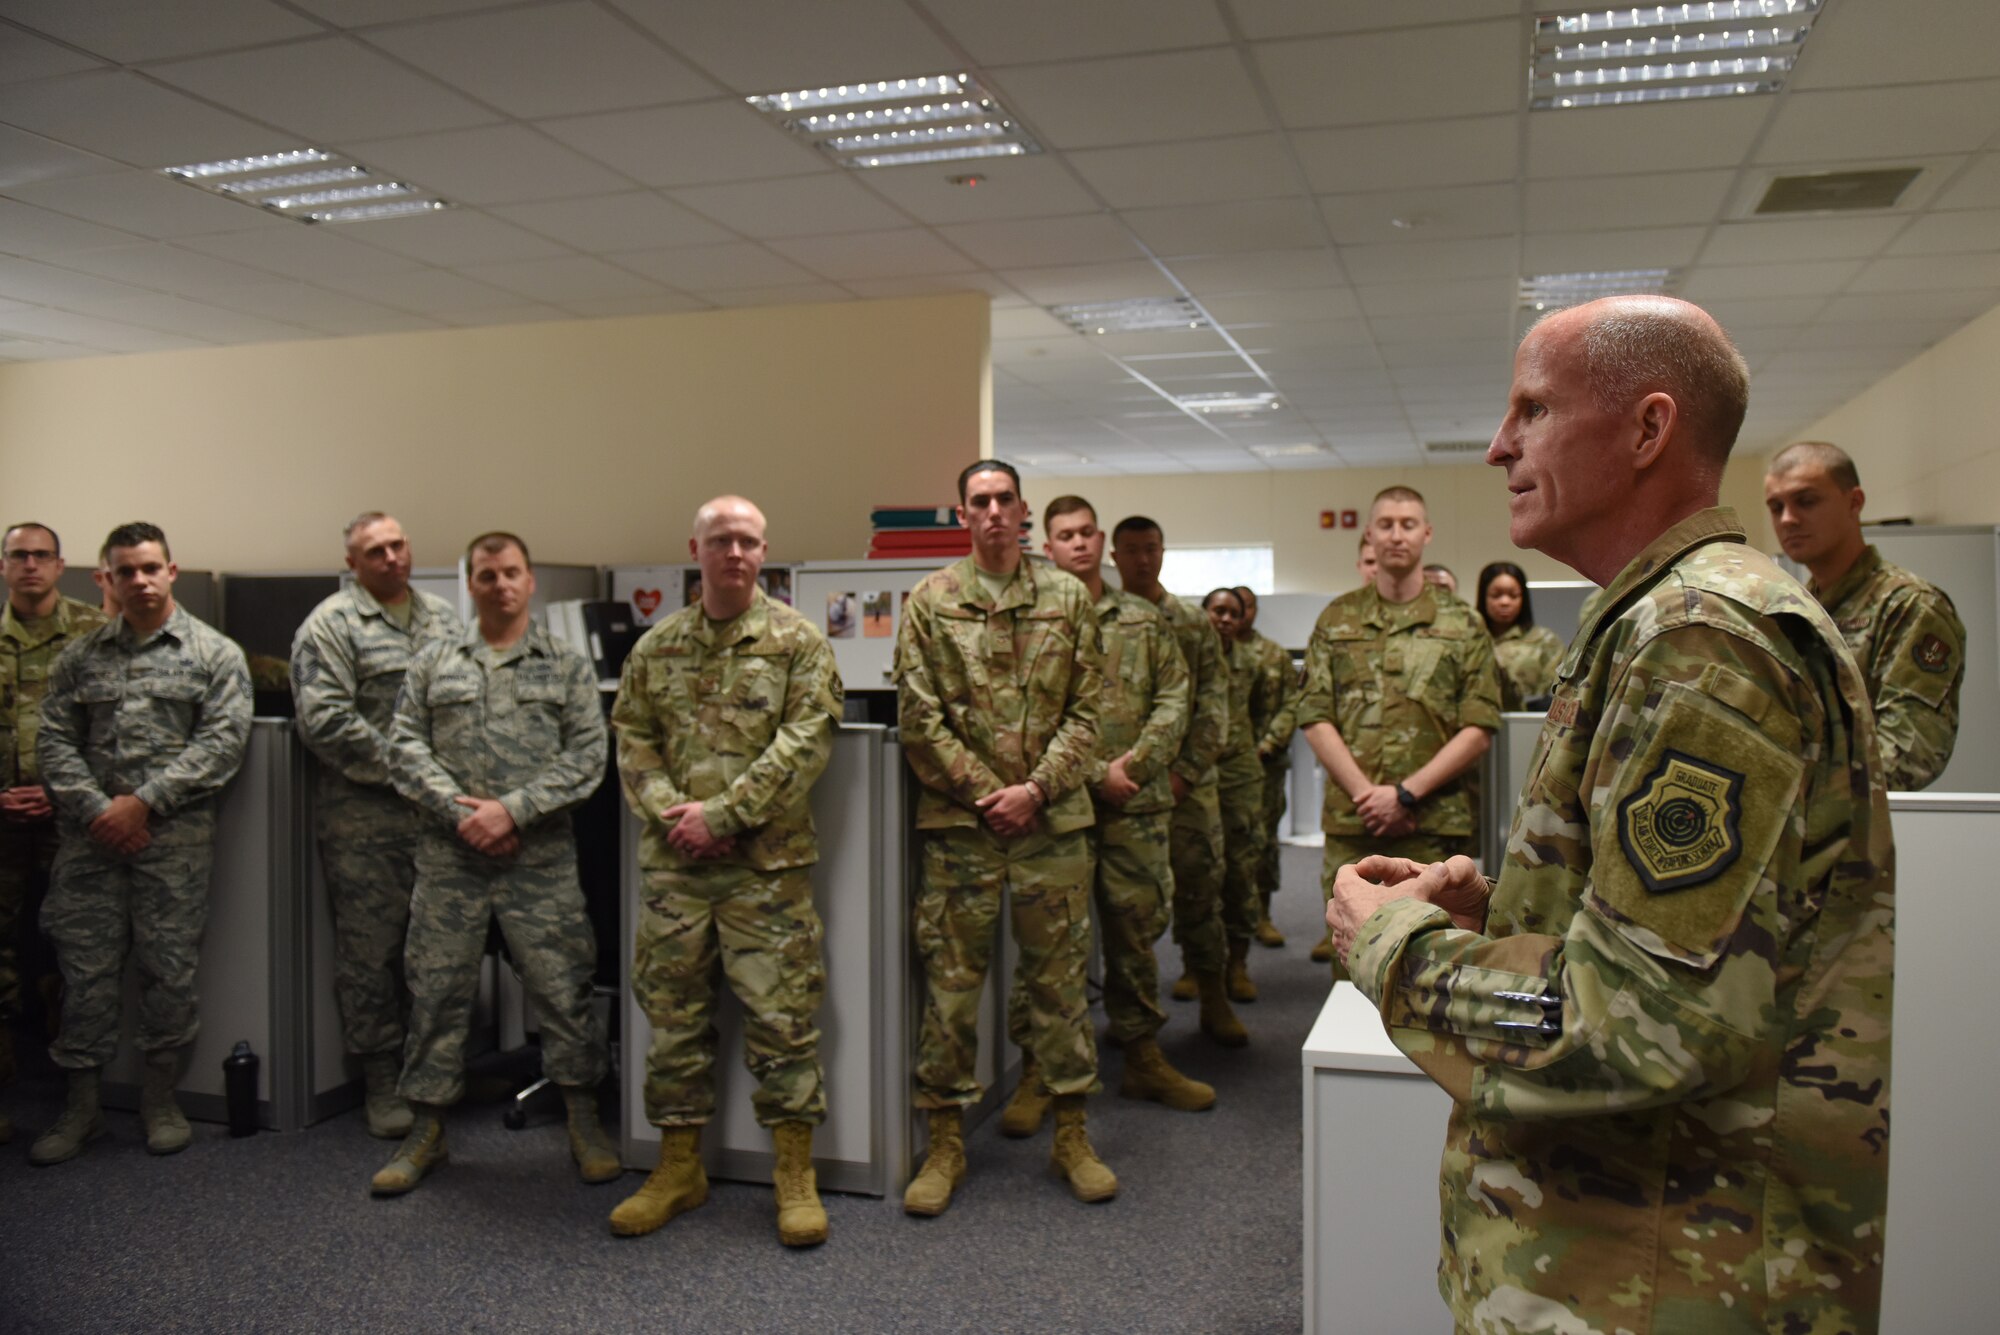 U.S. Air Force Vice Chief of Staff Gen. Stephen Wilson greets 39th Comptroller Suadron Airmen during a visit to Incirlik Air Base, Turkey, Sept. 29, 2019. Wilson thanked the Airmen for their role in the Air Force's mission accompishment and encouraged them to continue practicing good stewardship of government resources. (U.S. Air Force photo by Staff Sgt. Joshua Magbanua)